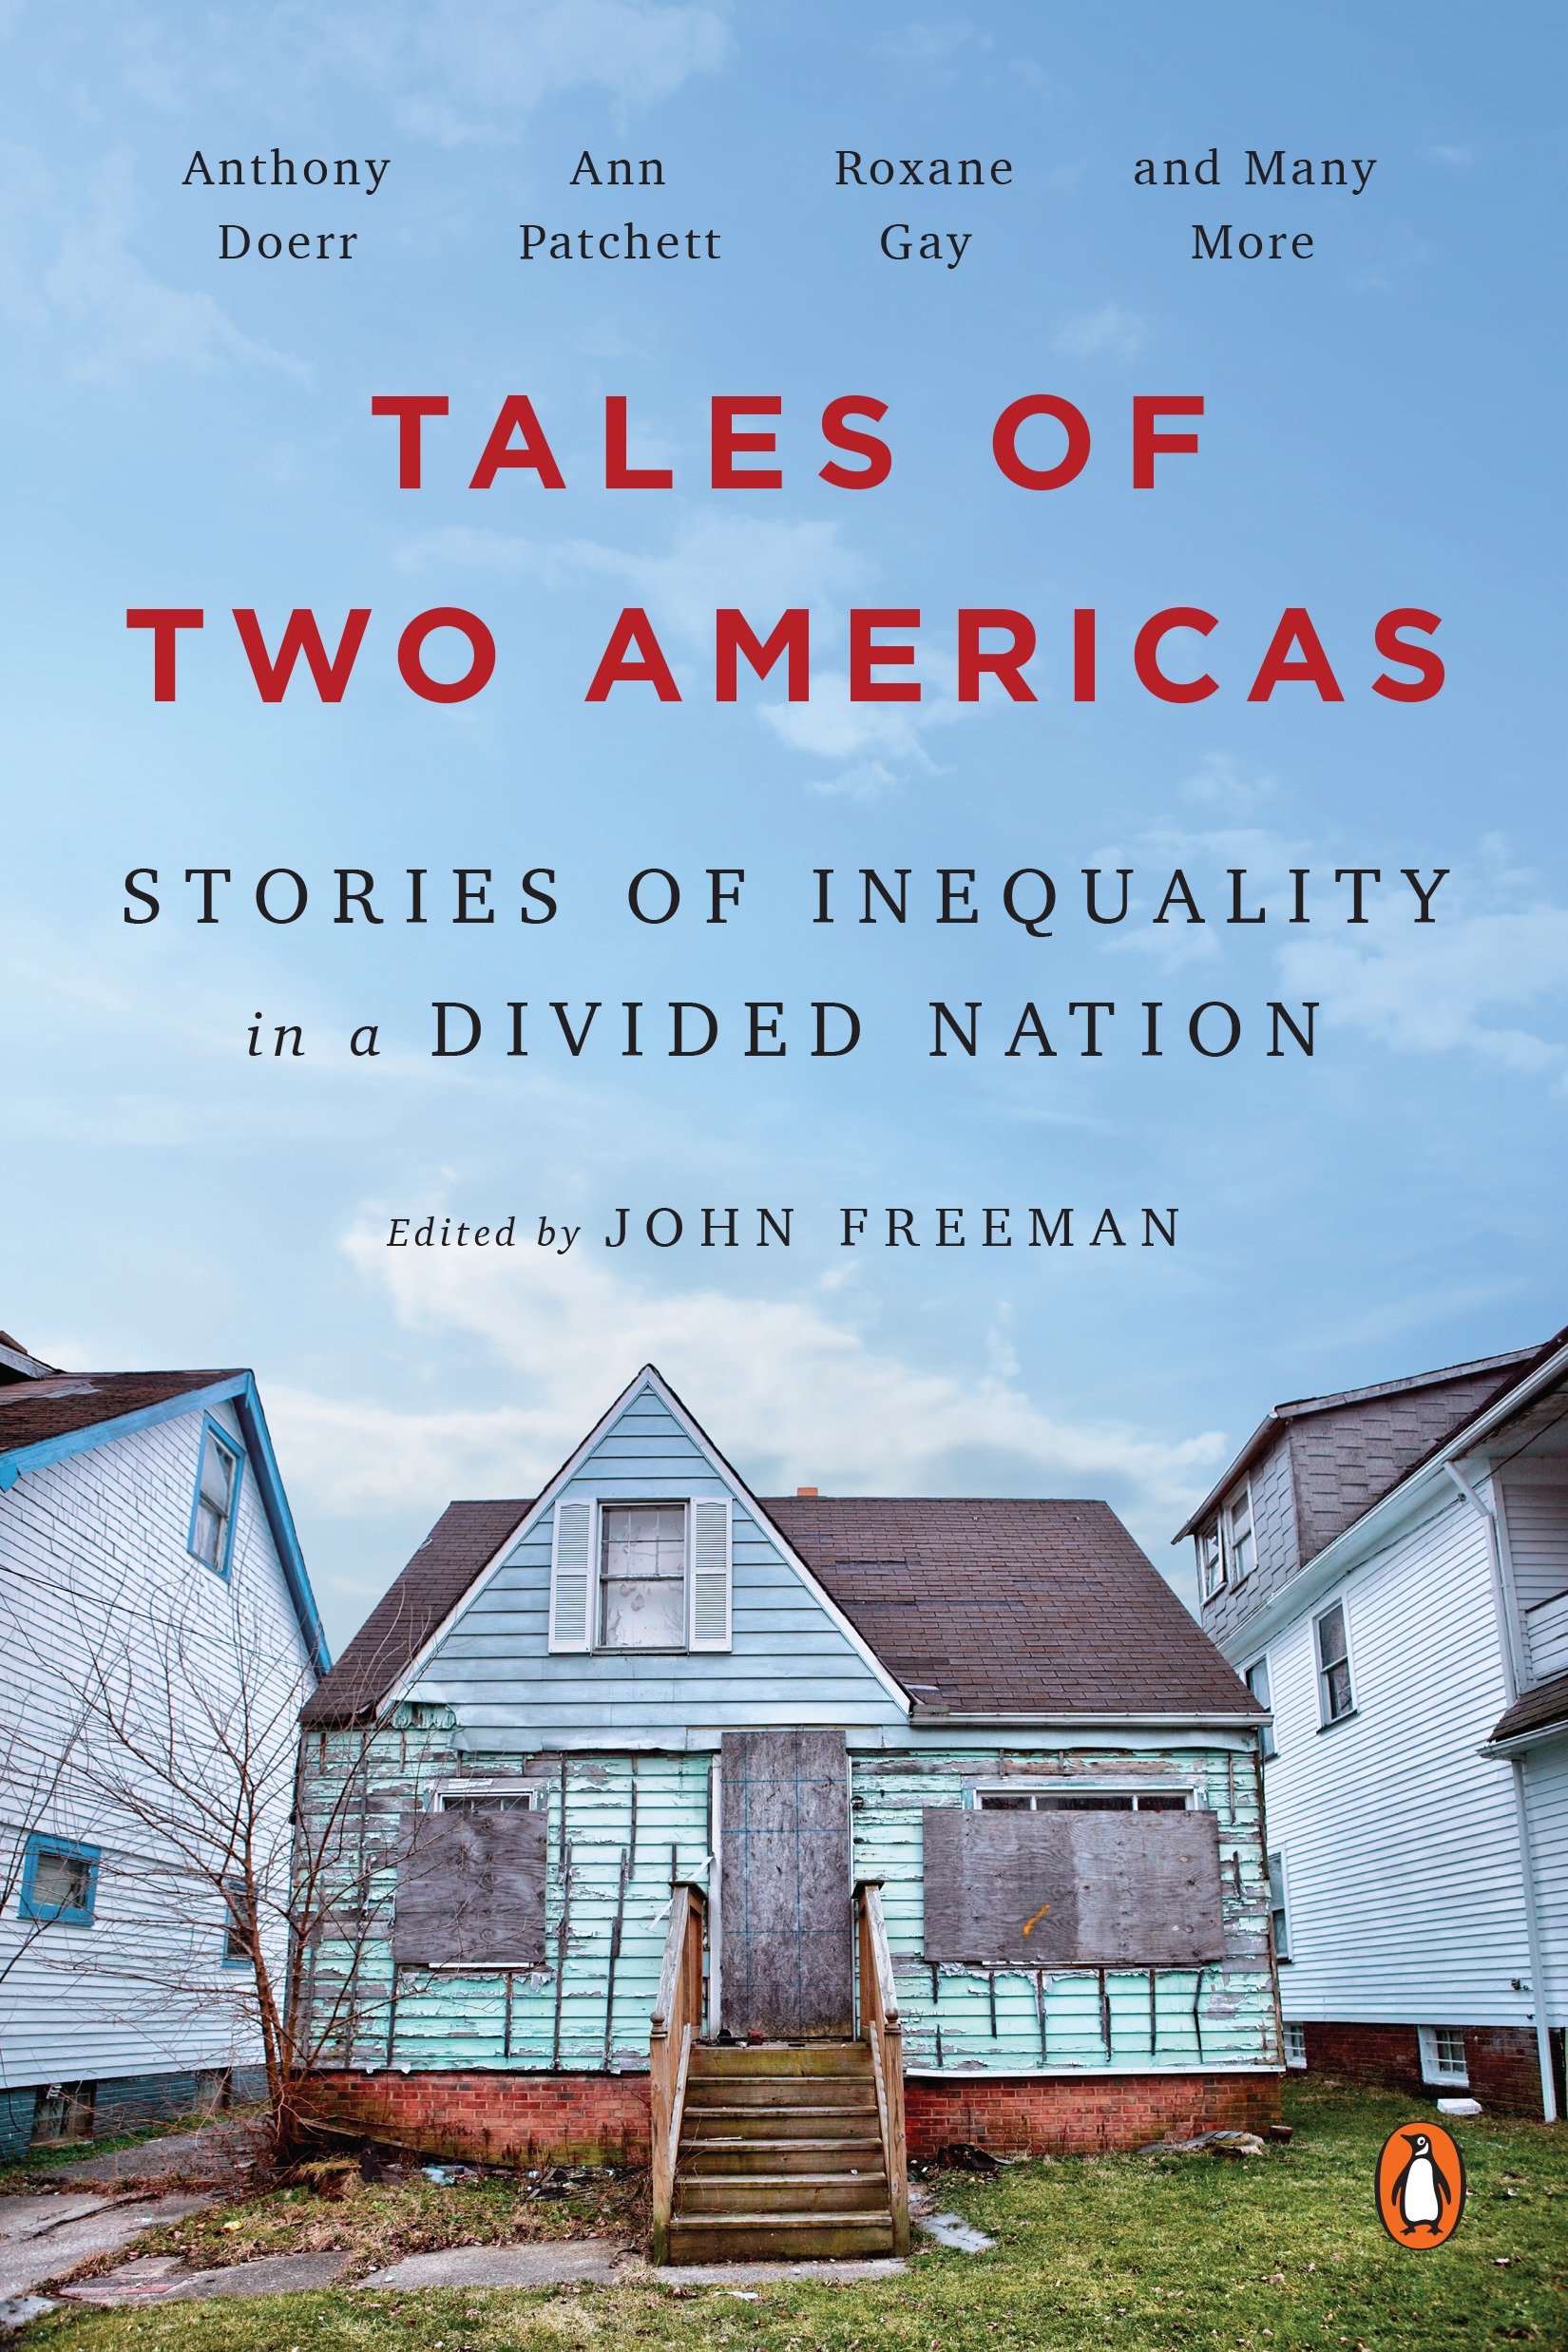 Link to Tales of Two Americas in the catalog